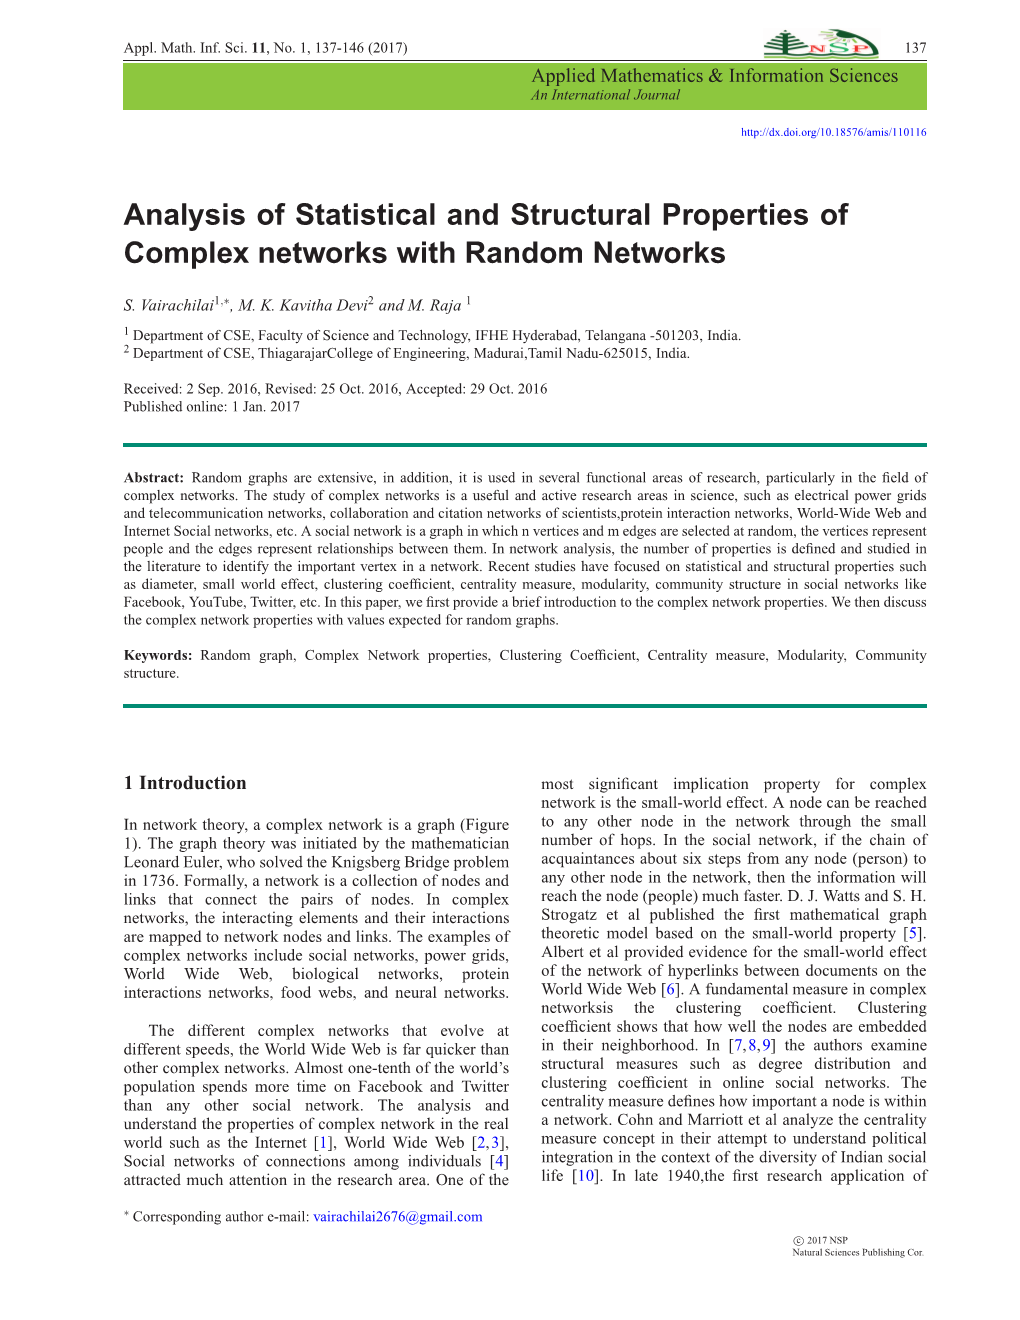 Analysis of Statistical and Structural Properties of Complex Networks with Random Networks